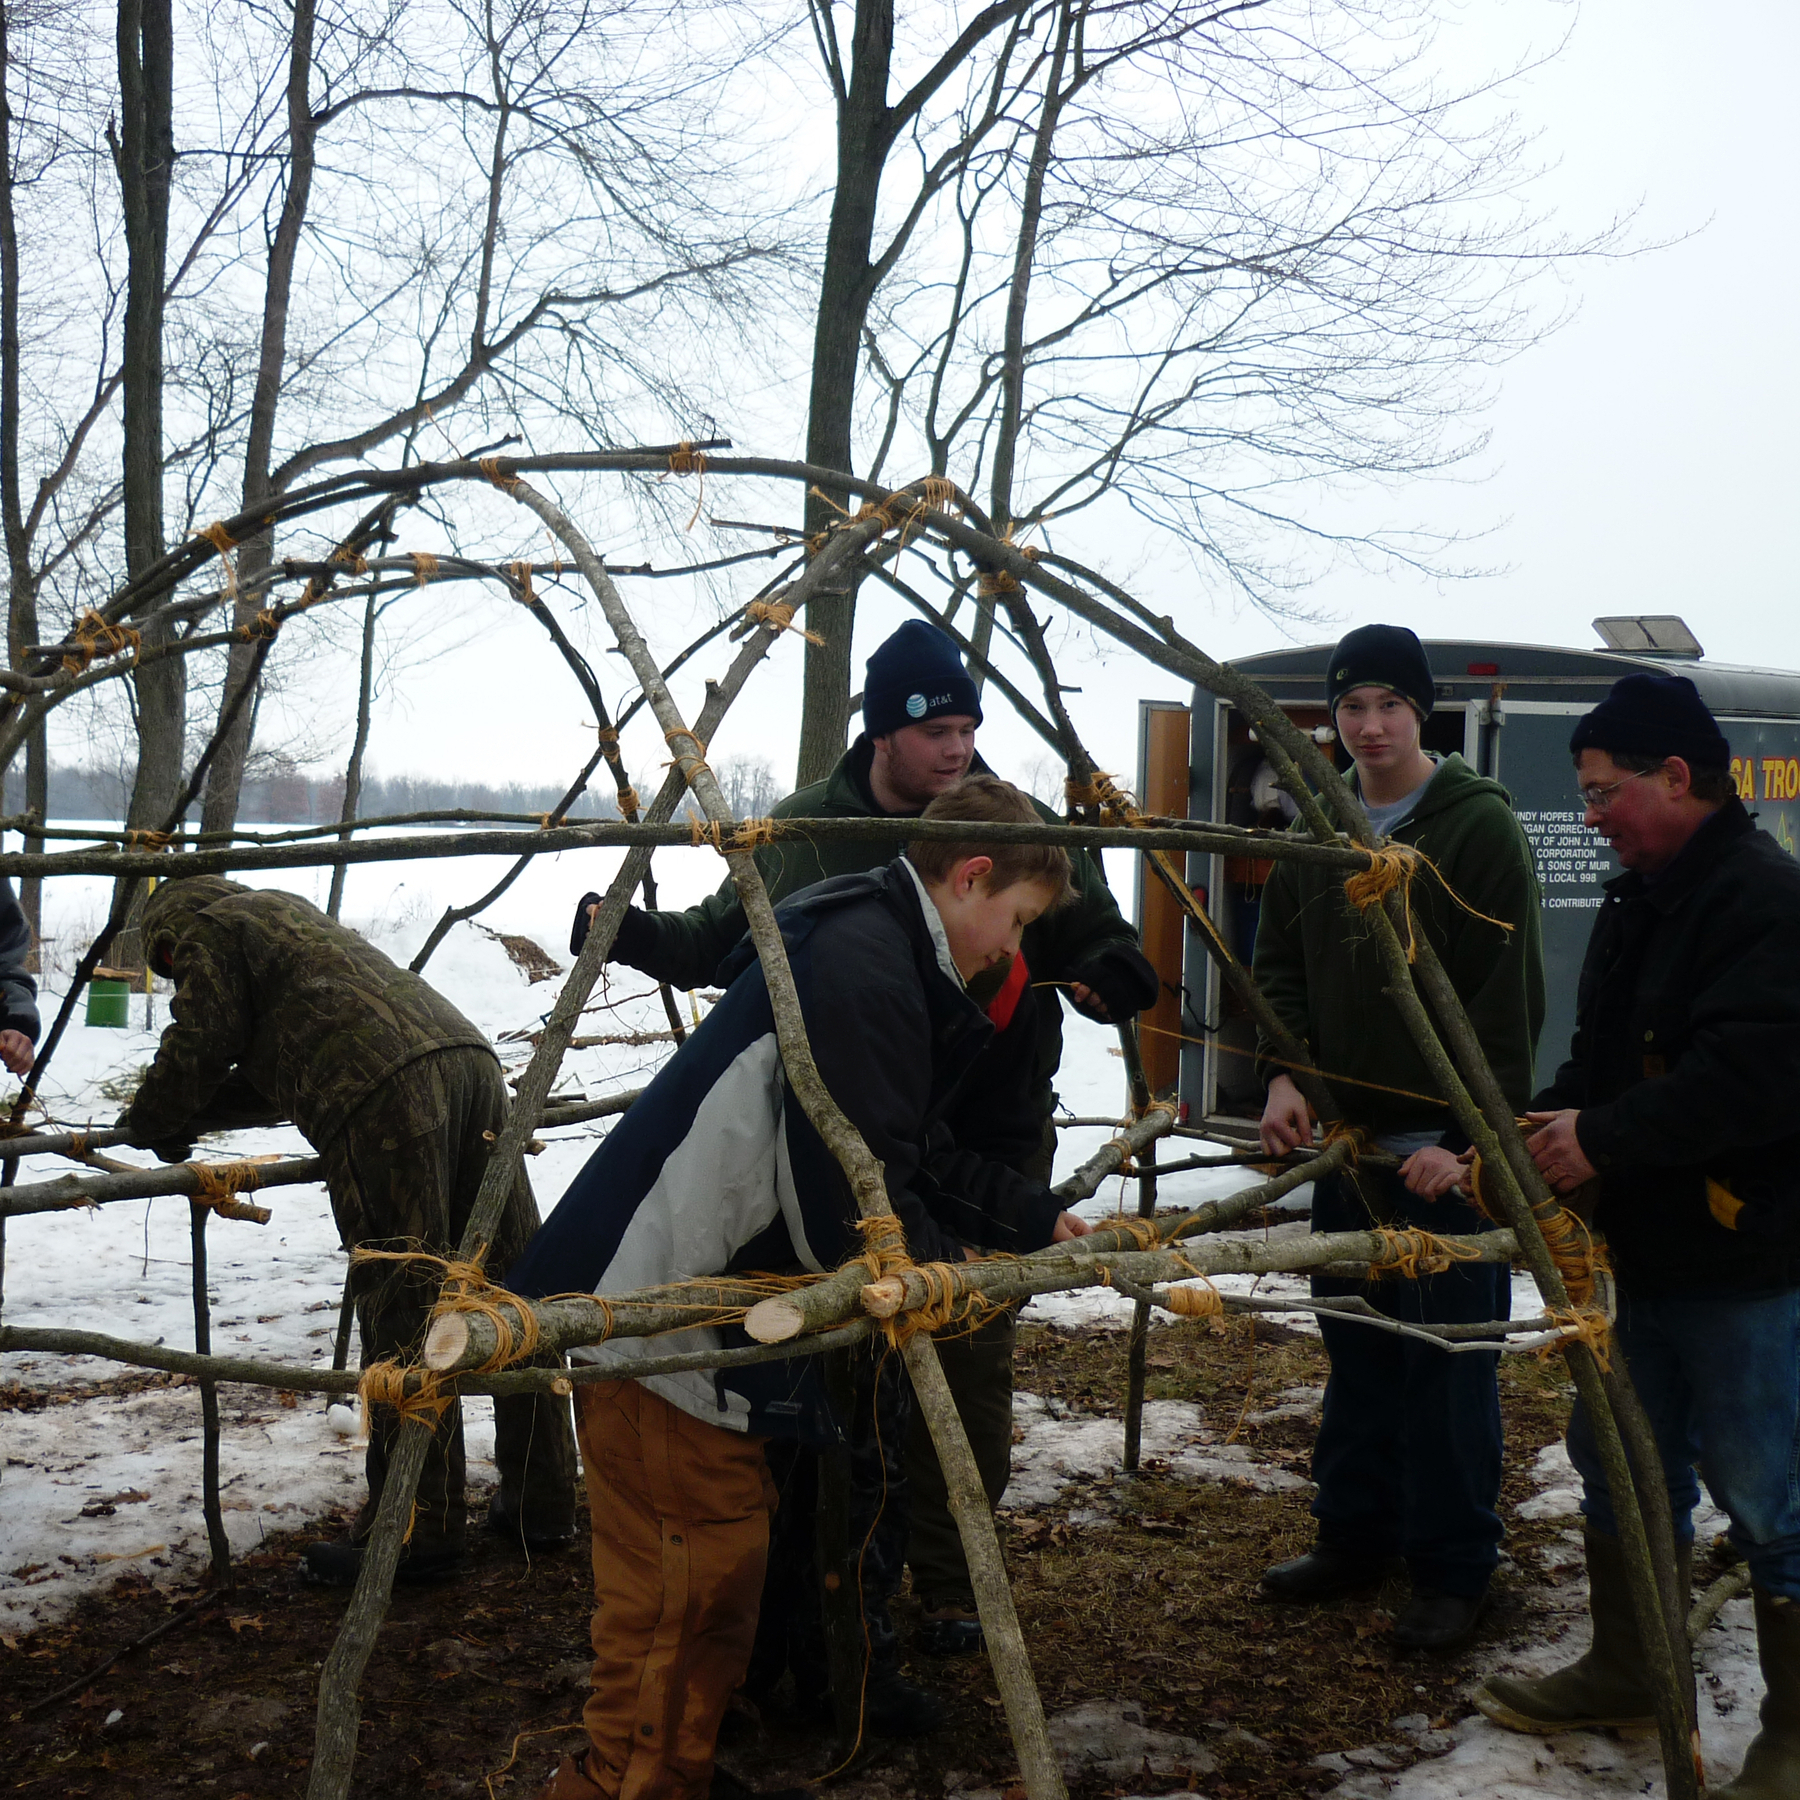 A wigwam made of sticks under construction by Boy Scouts in the winter.